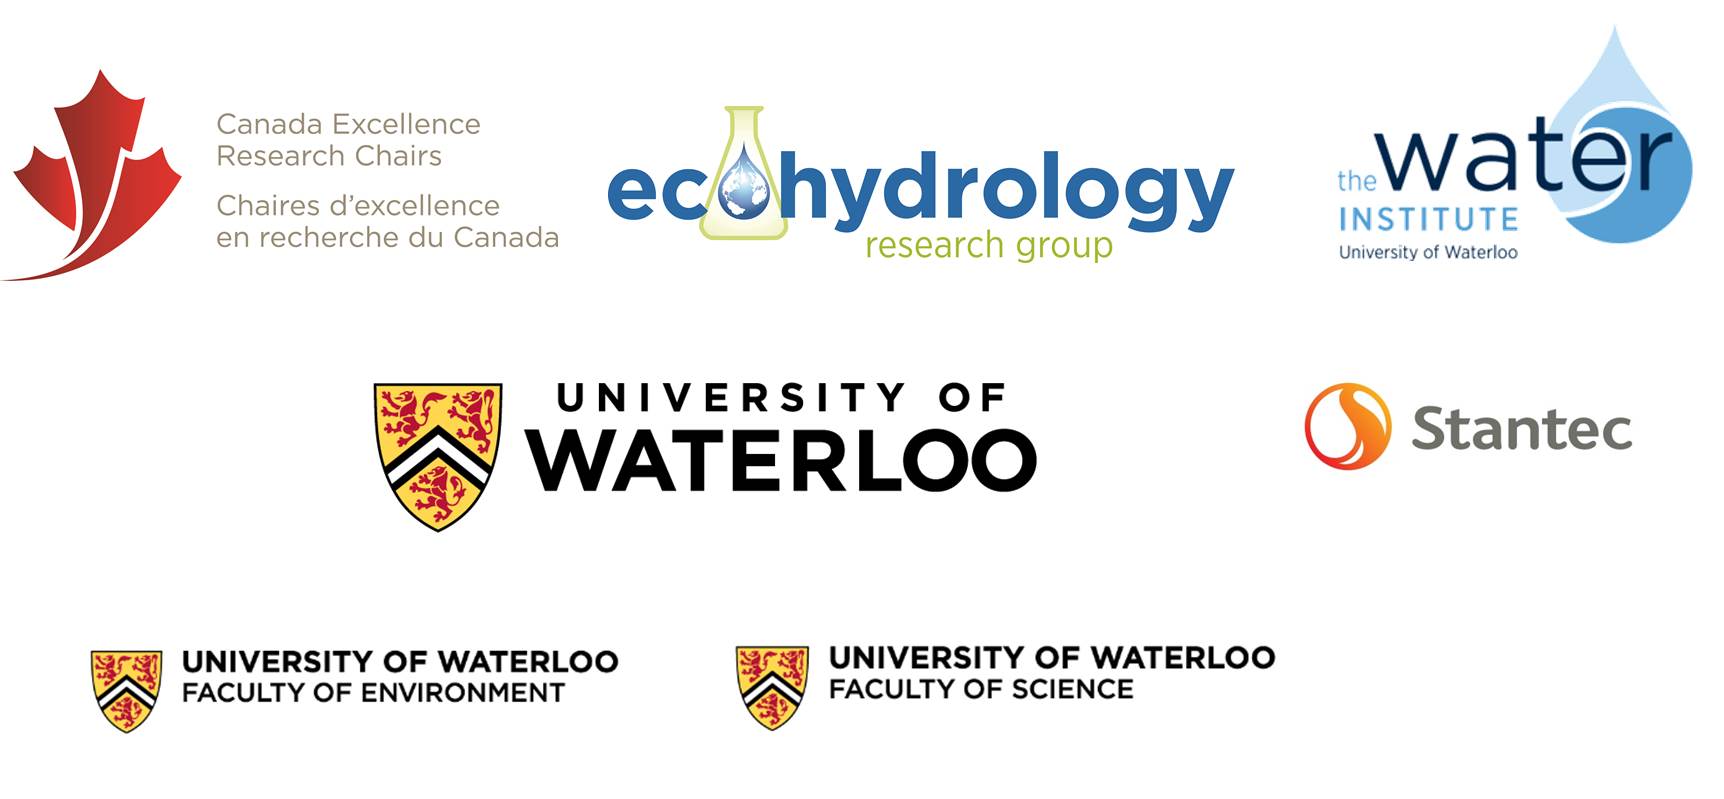  Canada Excellence Research Chairs, Ecohydrology Research Group, the Water Institute, University of Waterloo, Stantec, UW Faculty of Environment, UW Faculty of Science